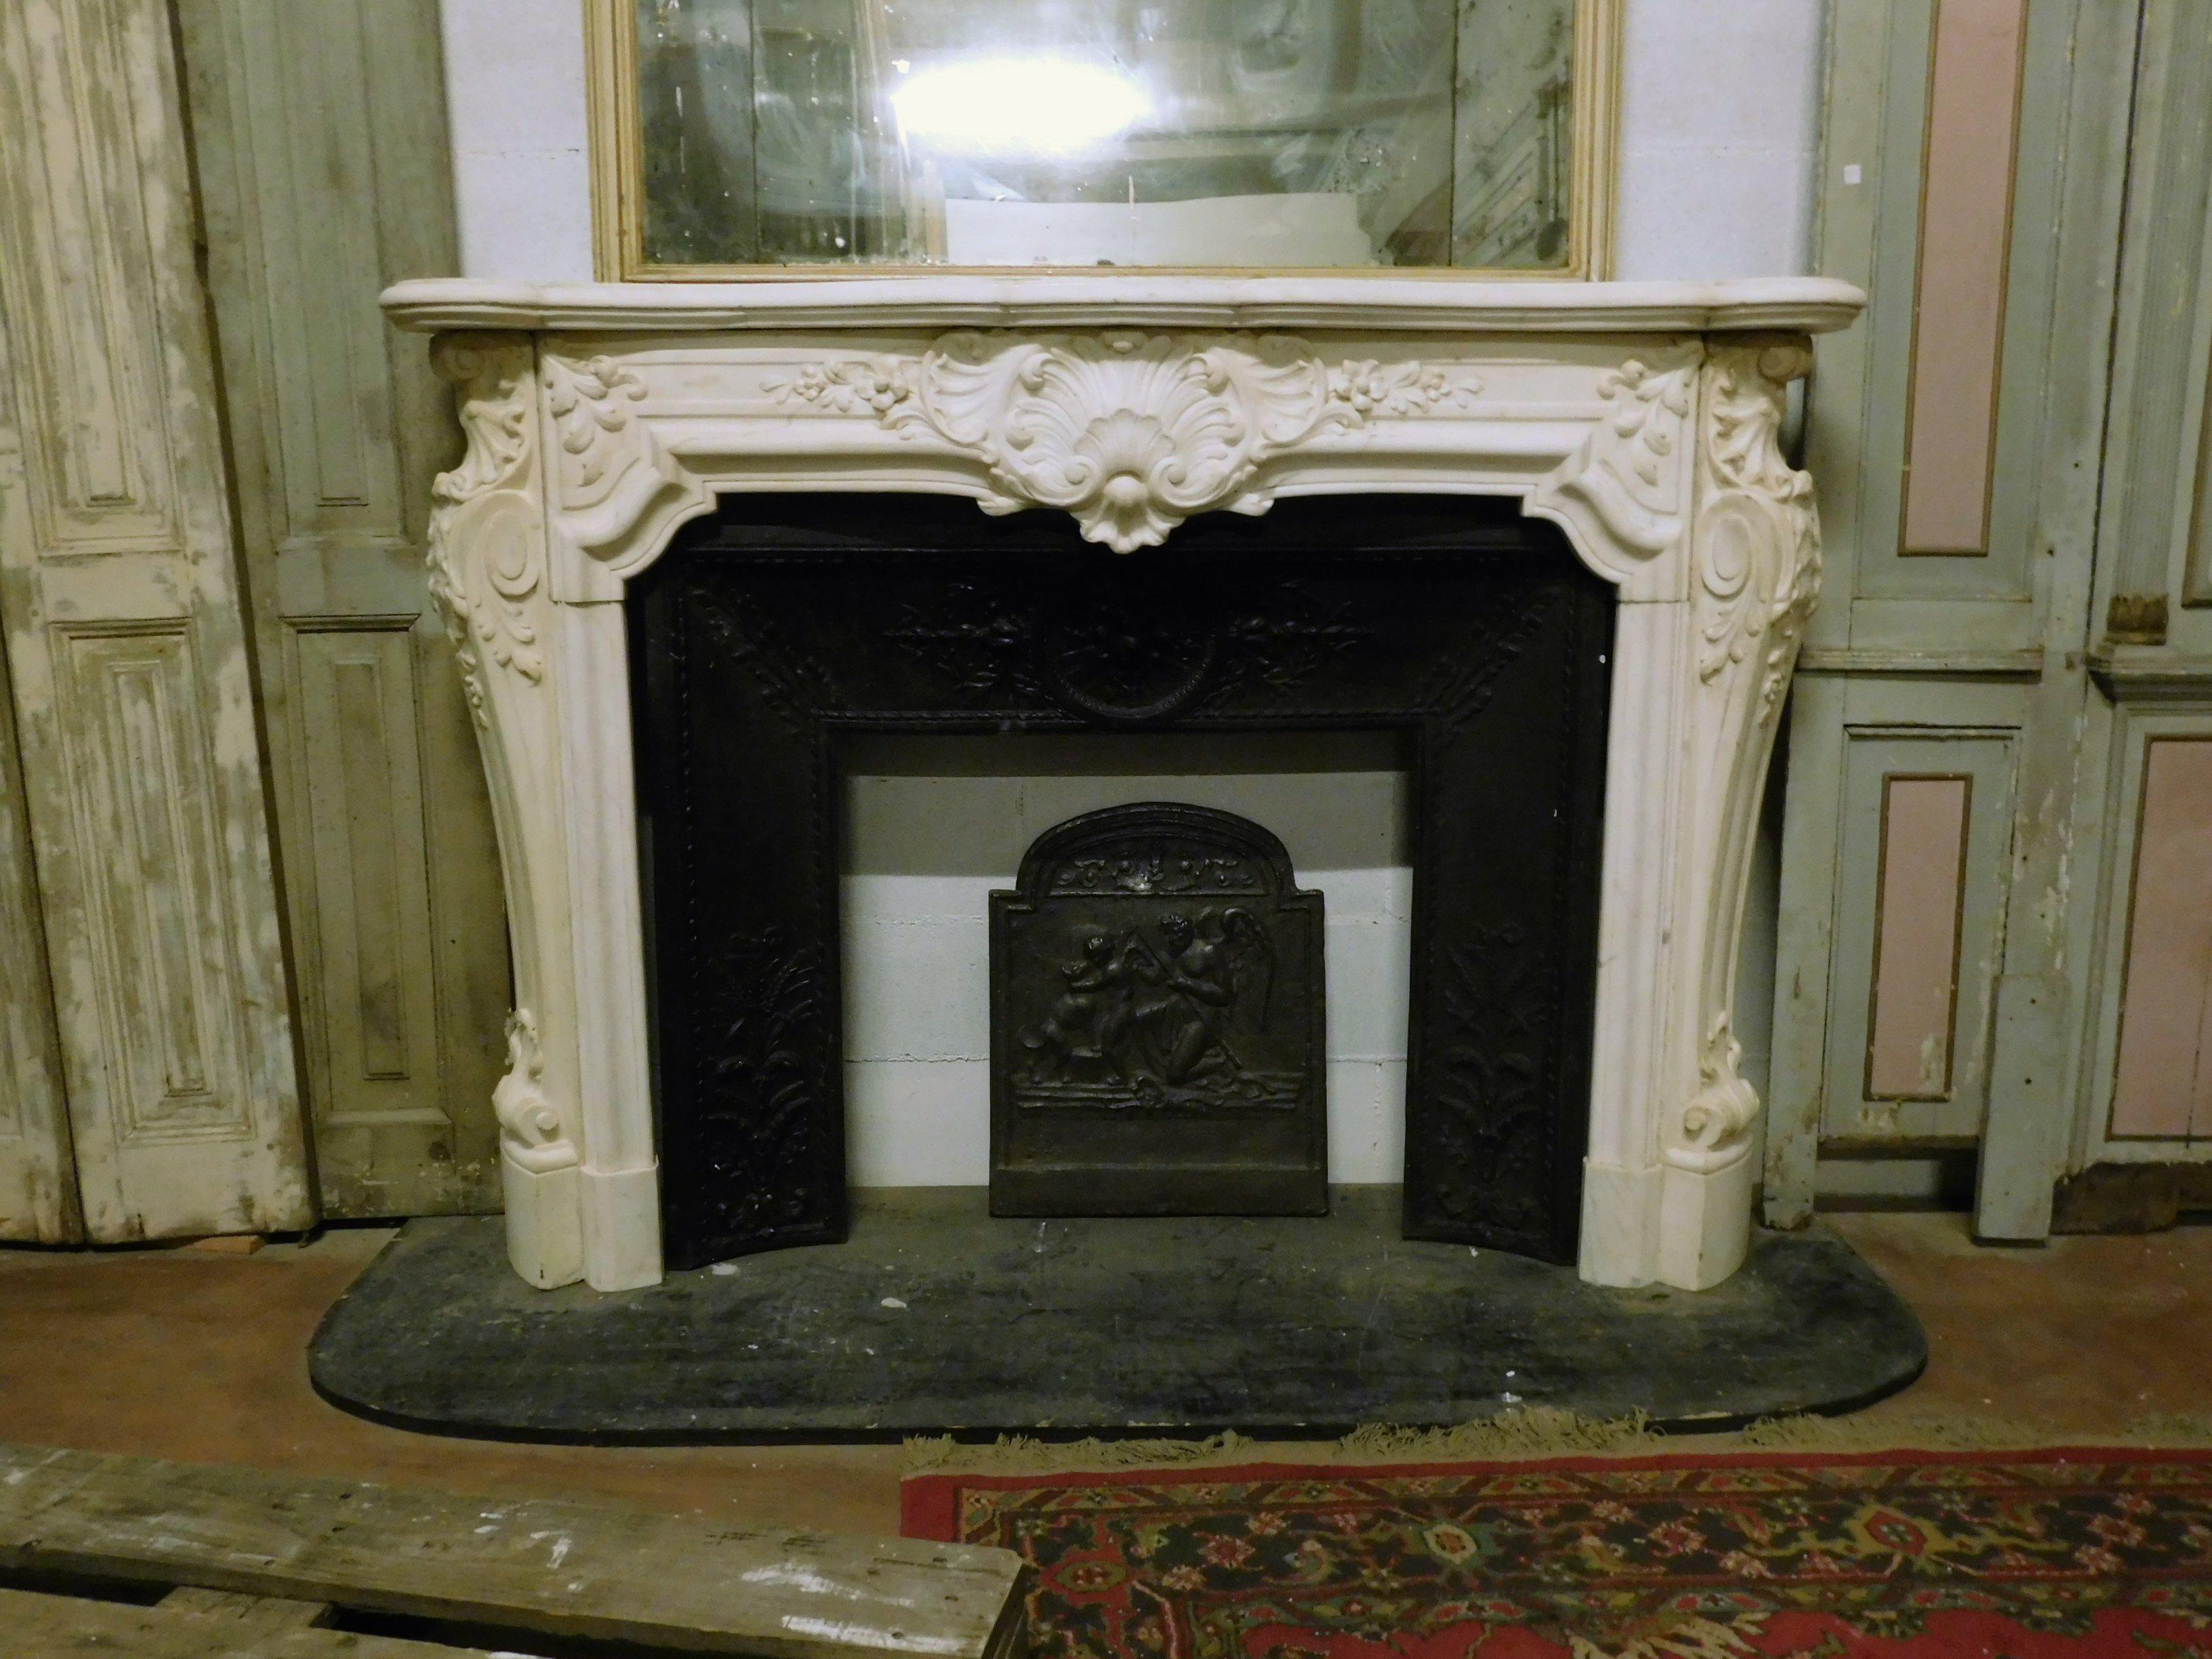 Ancient and important fireplace in white statuary marble of Carrara, richly carved by hand with festoons and flora typical of the decorations of the time, with many sculptures both on ga, be and on the pediment, carved entirely by hand in the early